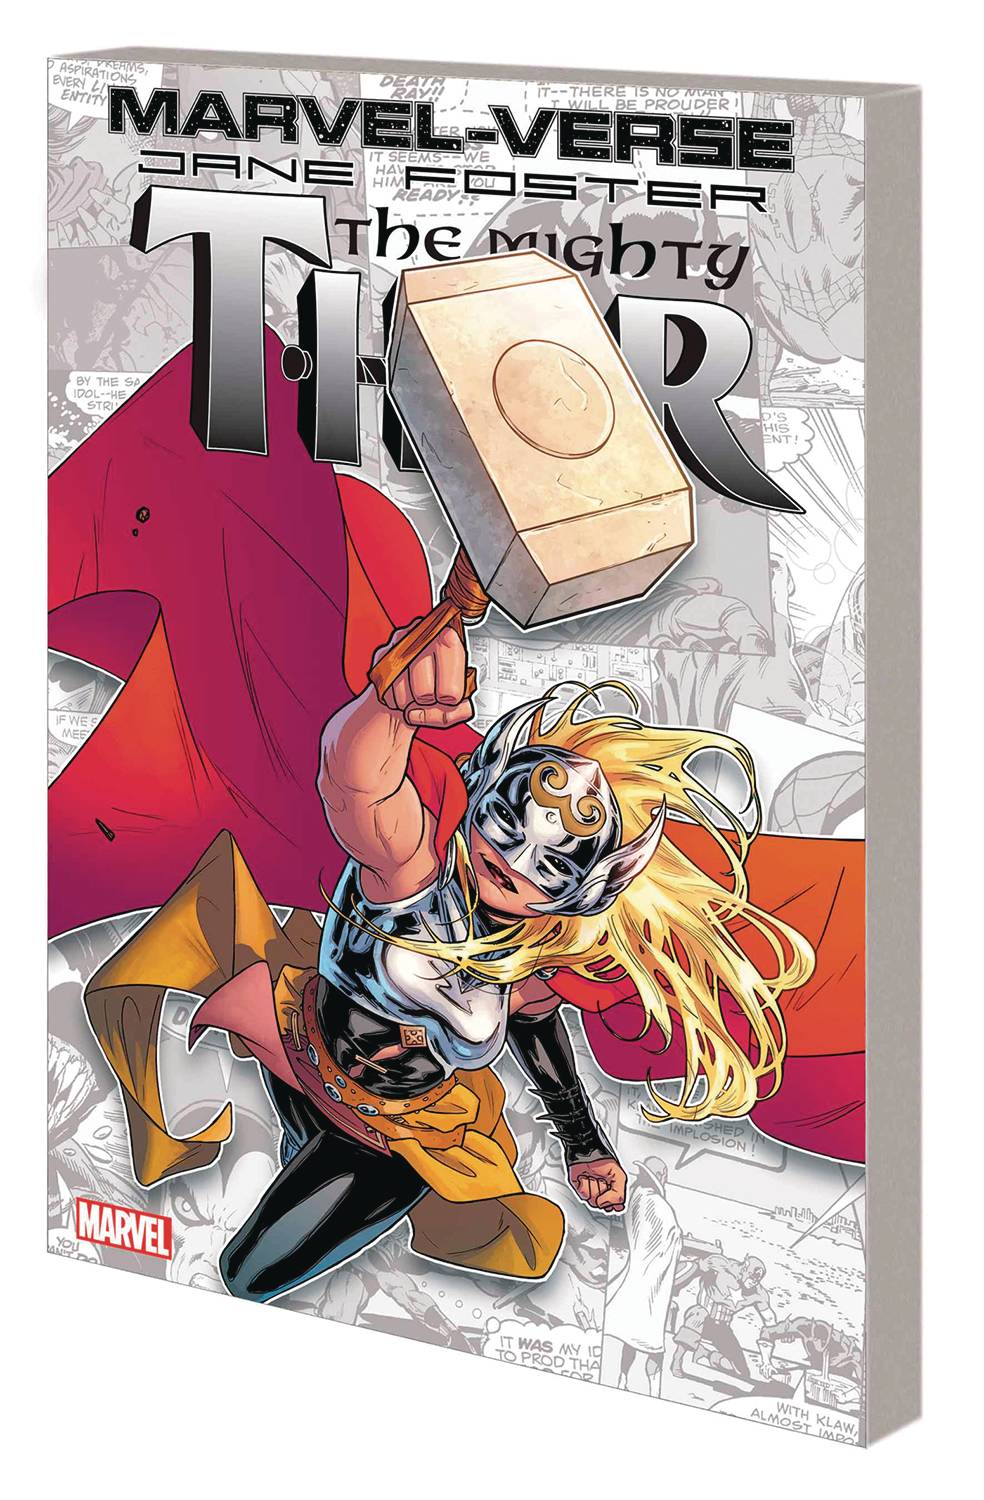 Marvel-Verse Jane Foster Mighty Thor